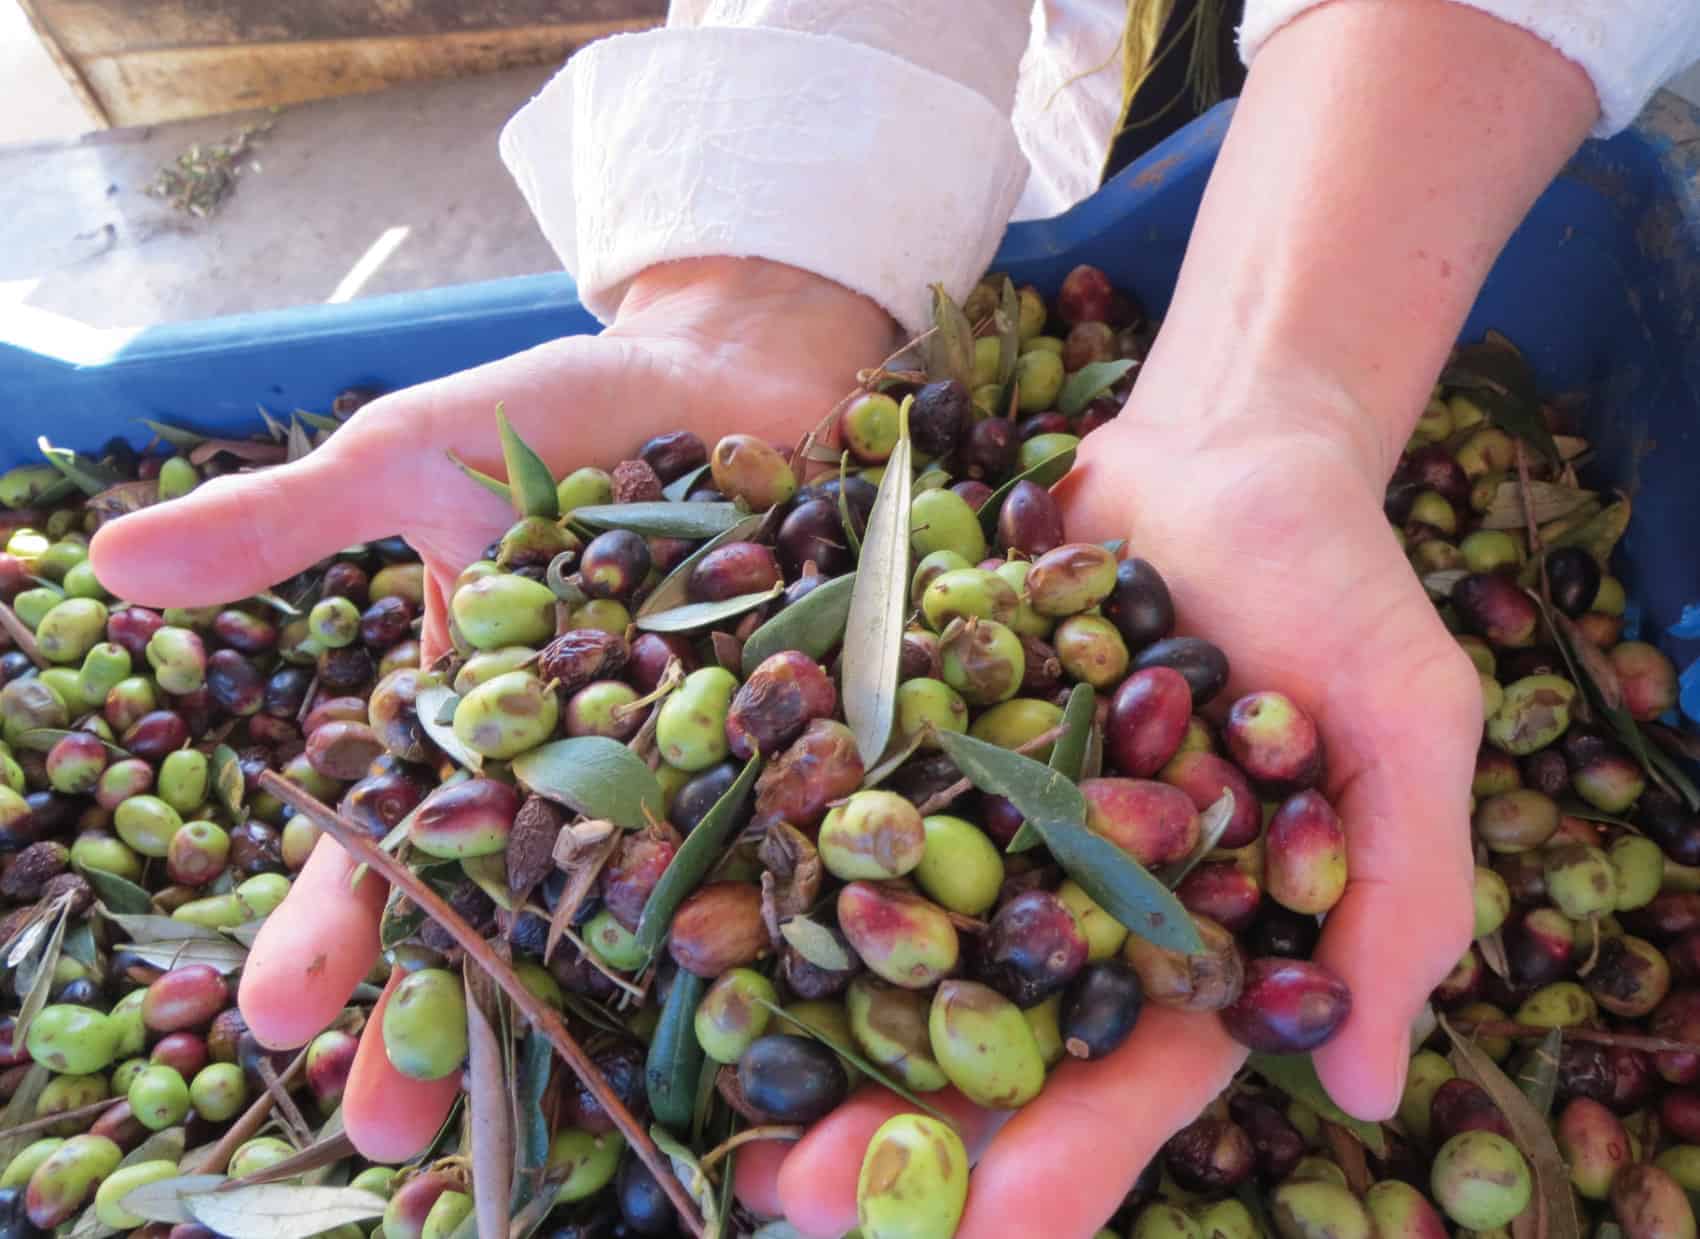 Picking up seeds, spices and olives